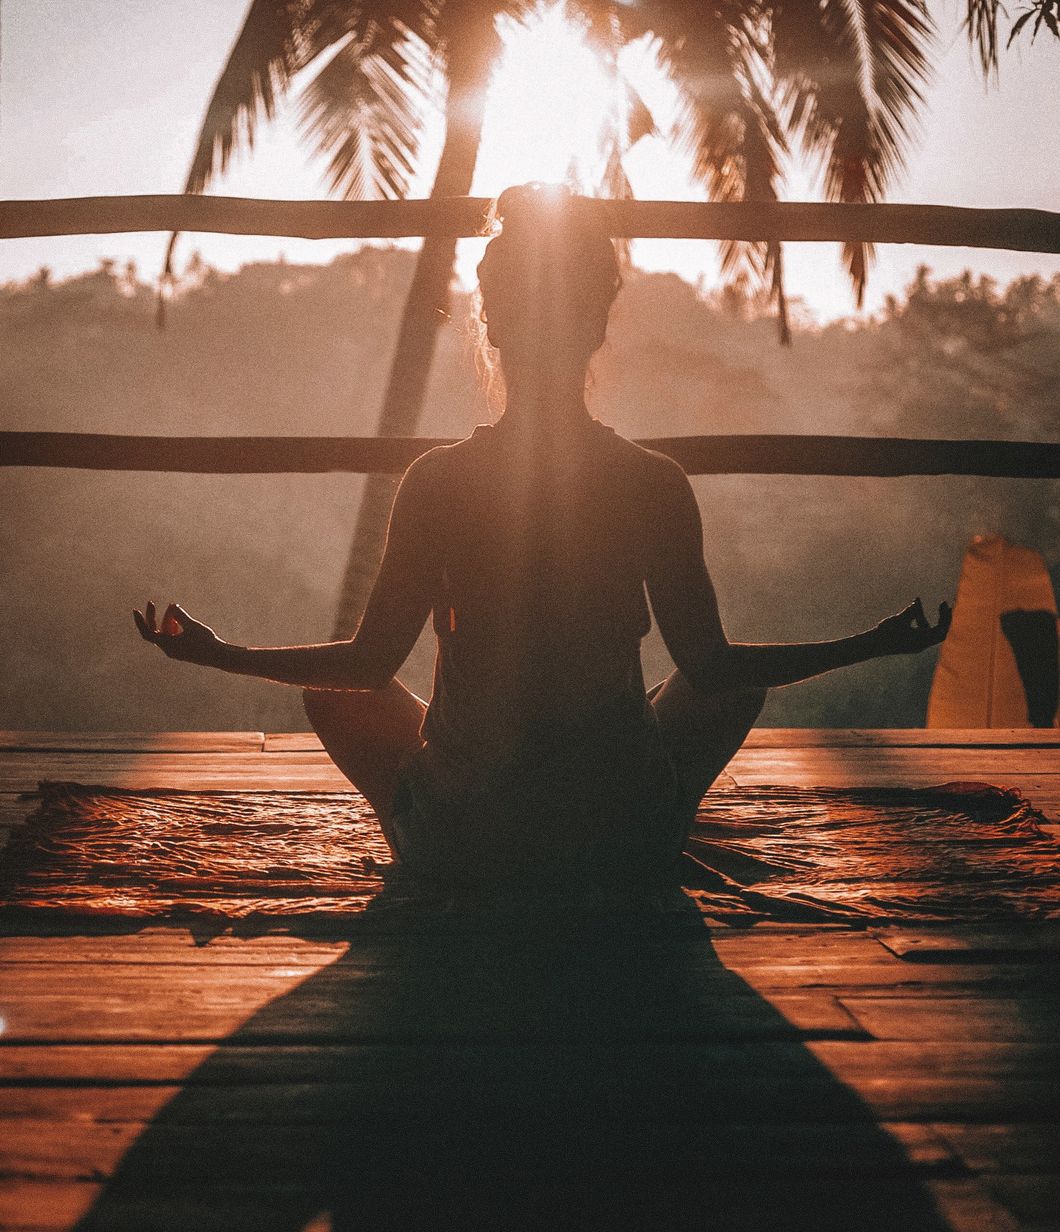 I Tried 21 Days Of Guided Meditation And I Was Shocked By What I Learned